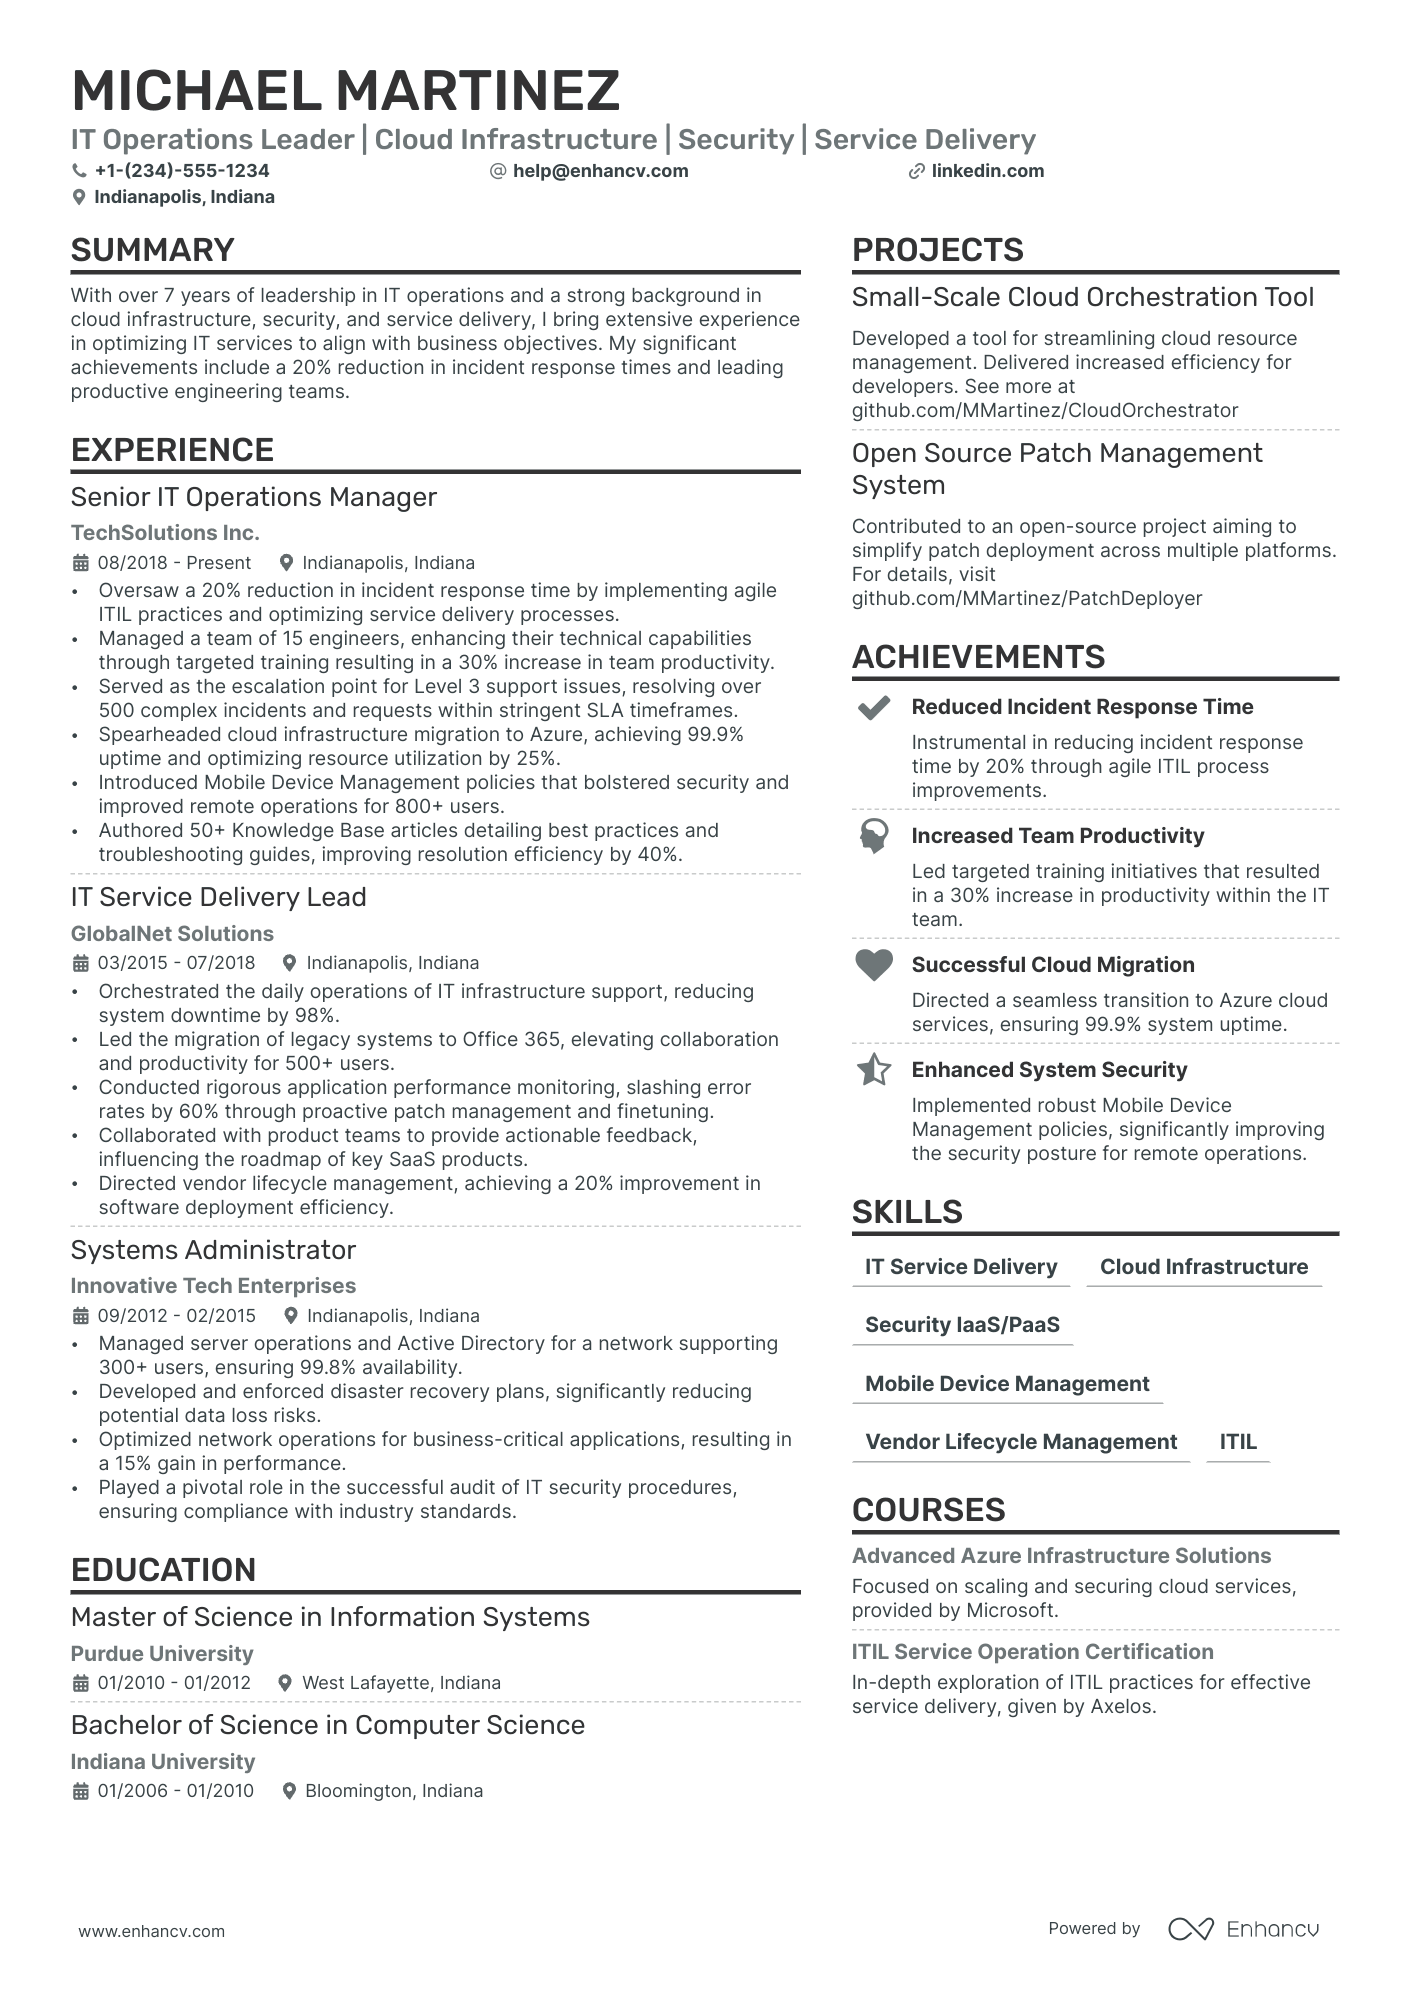 IT Operations Manager resume example